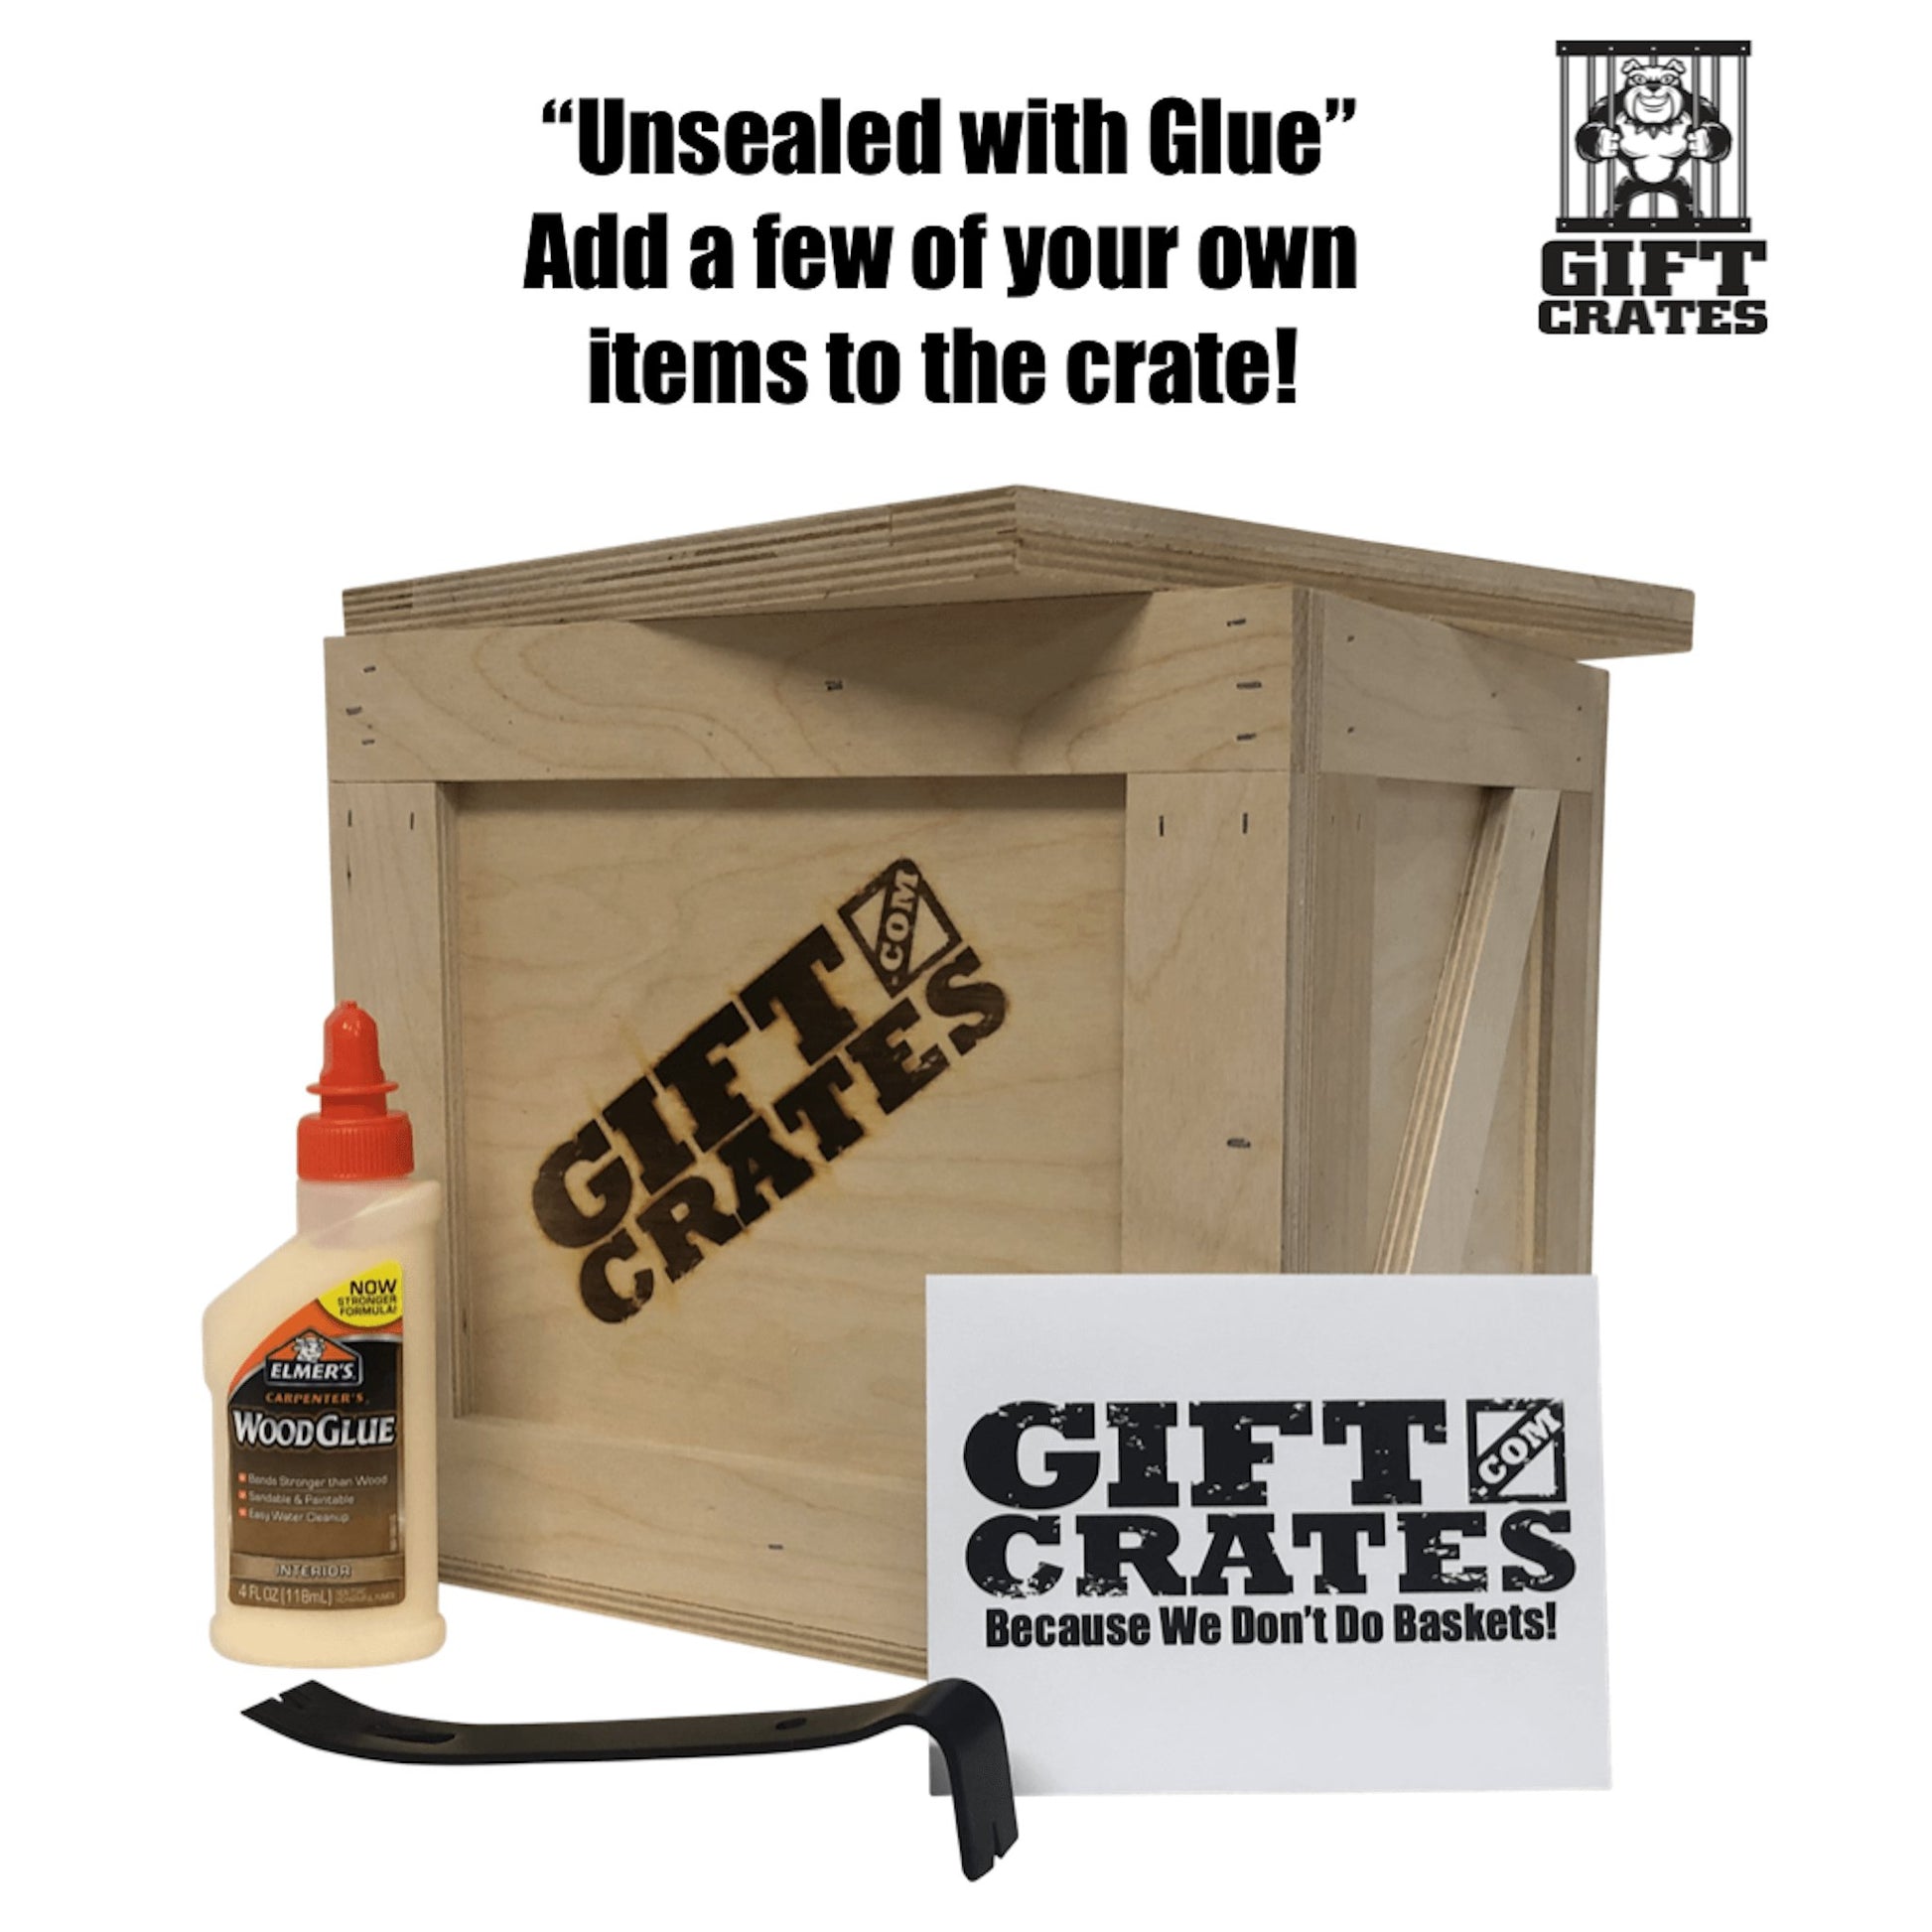 Pro Golfers Crate - Gift Crates